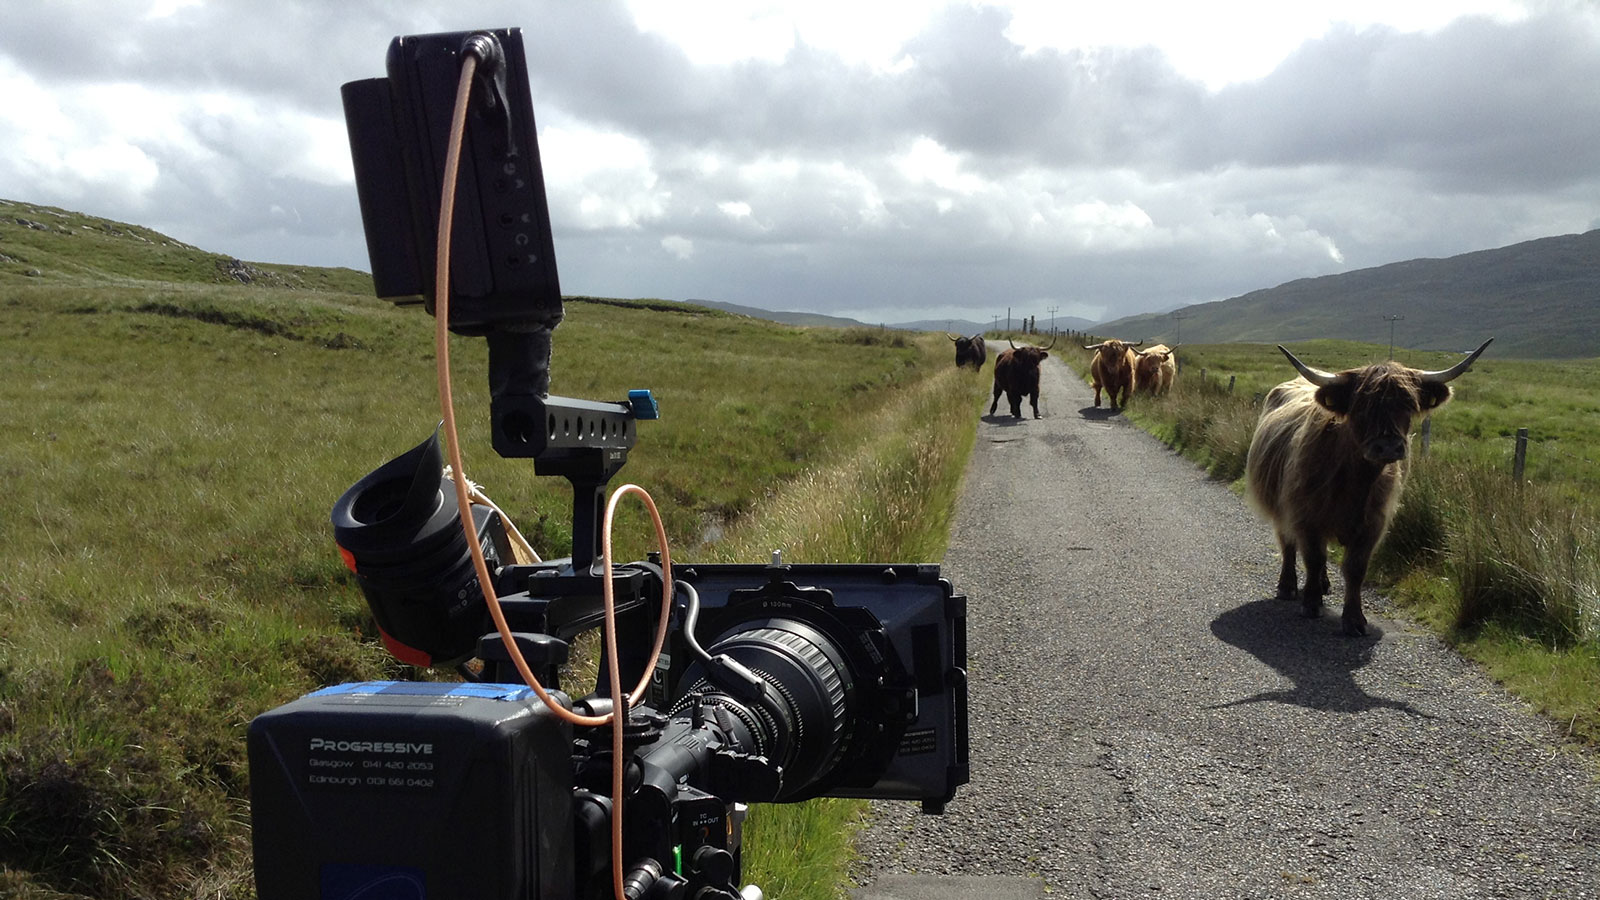 Katie Morag filming on location, showing some highland cattle walking along a rural road